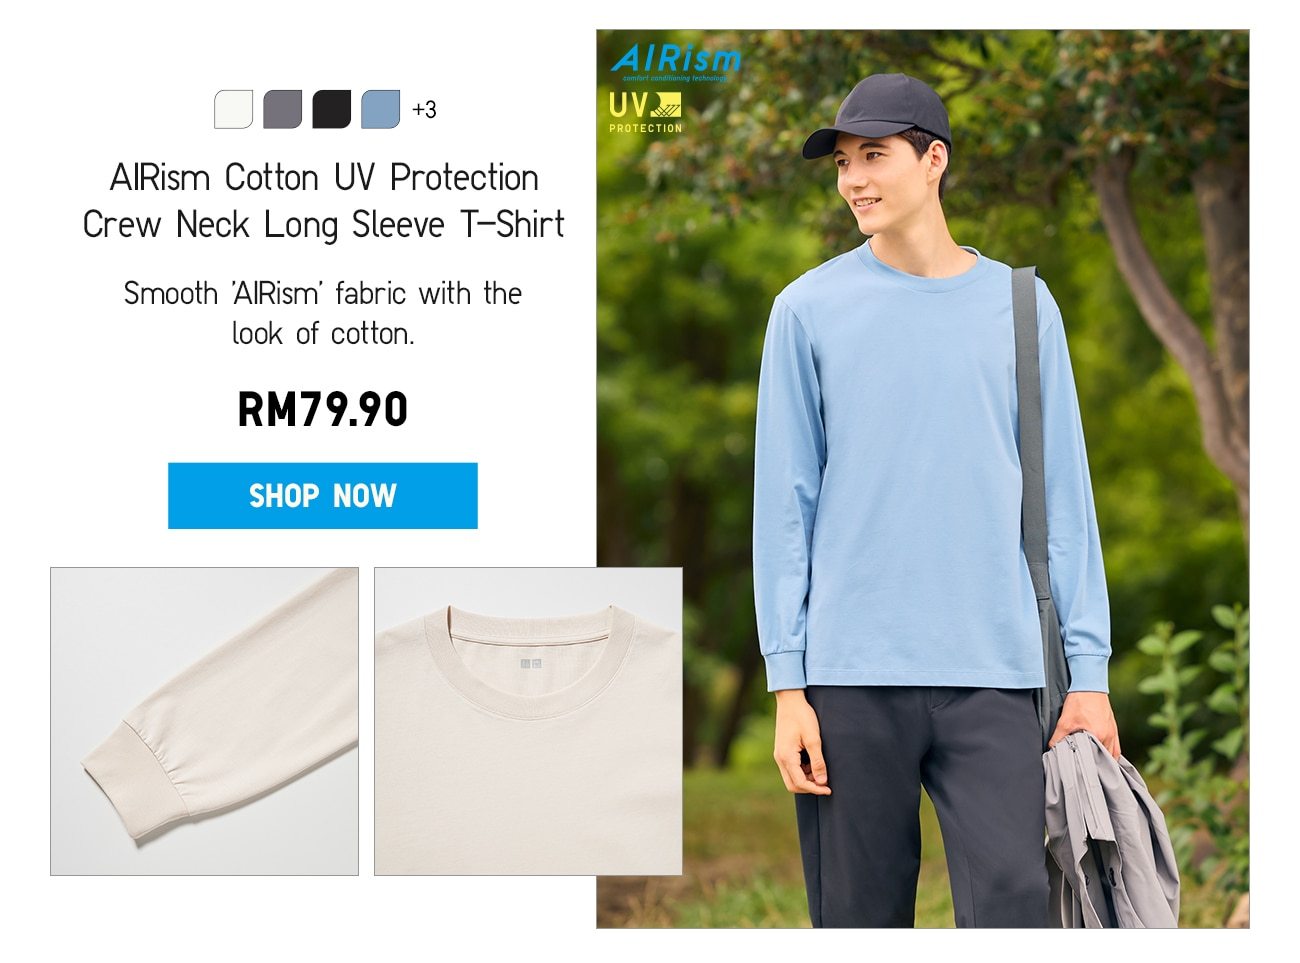 AIRism Cotton UV Protection Crew Neck Long Sleeve T-Shirt